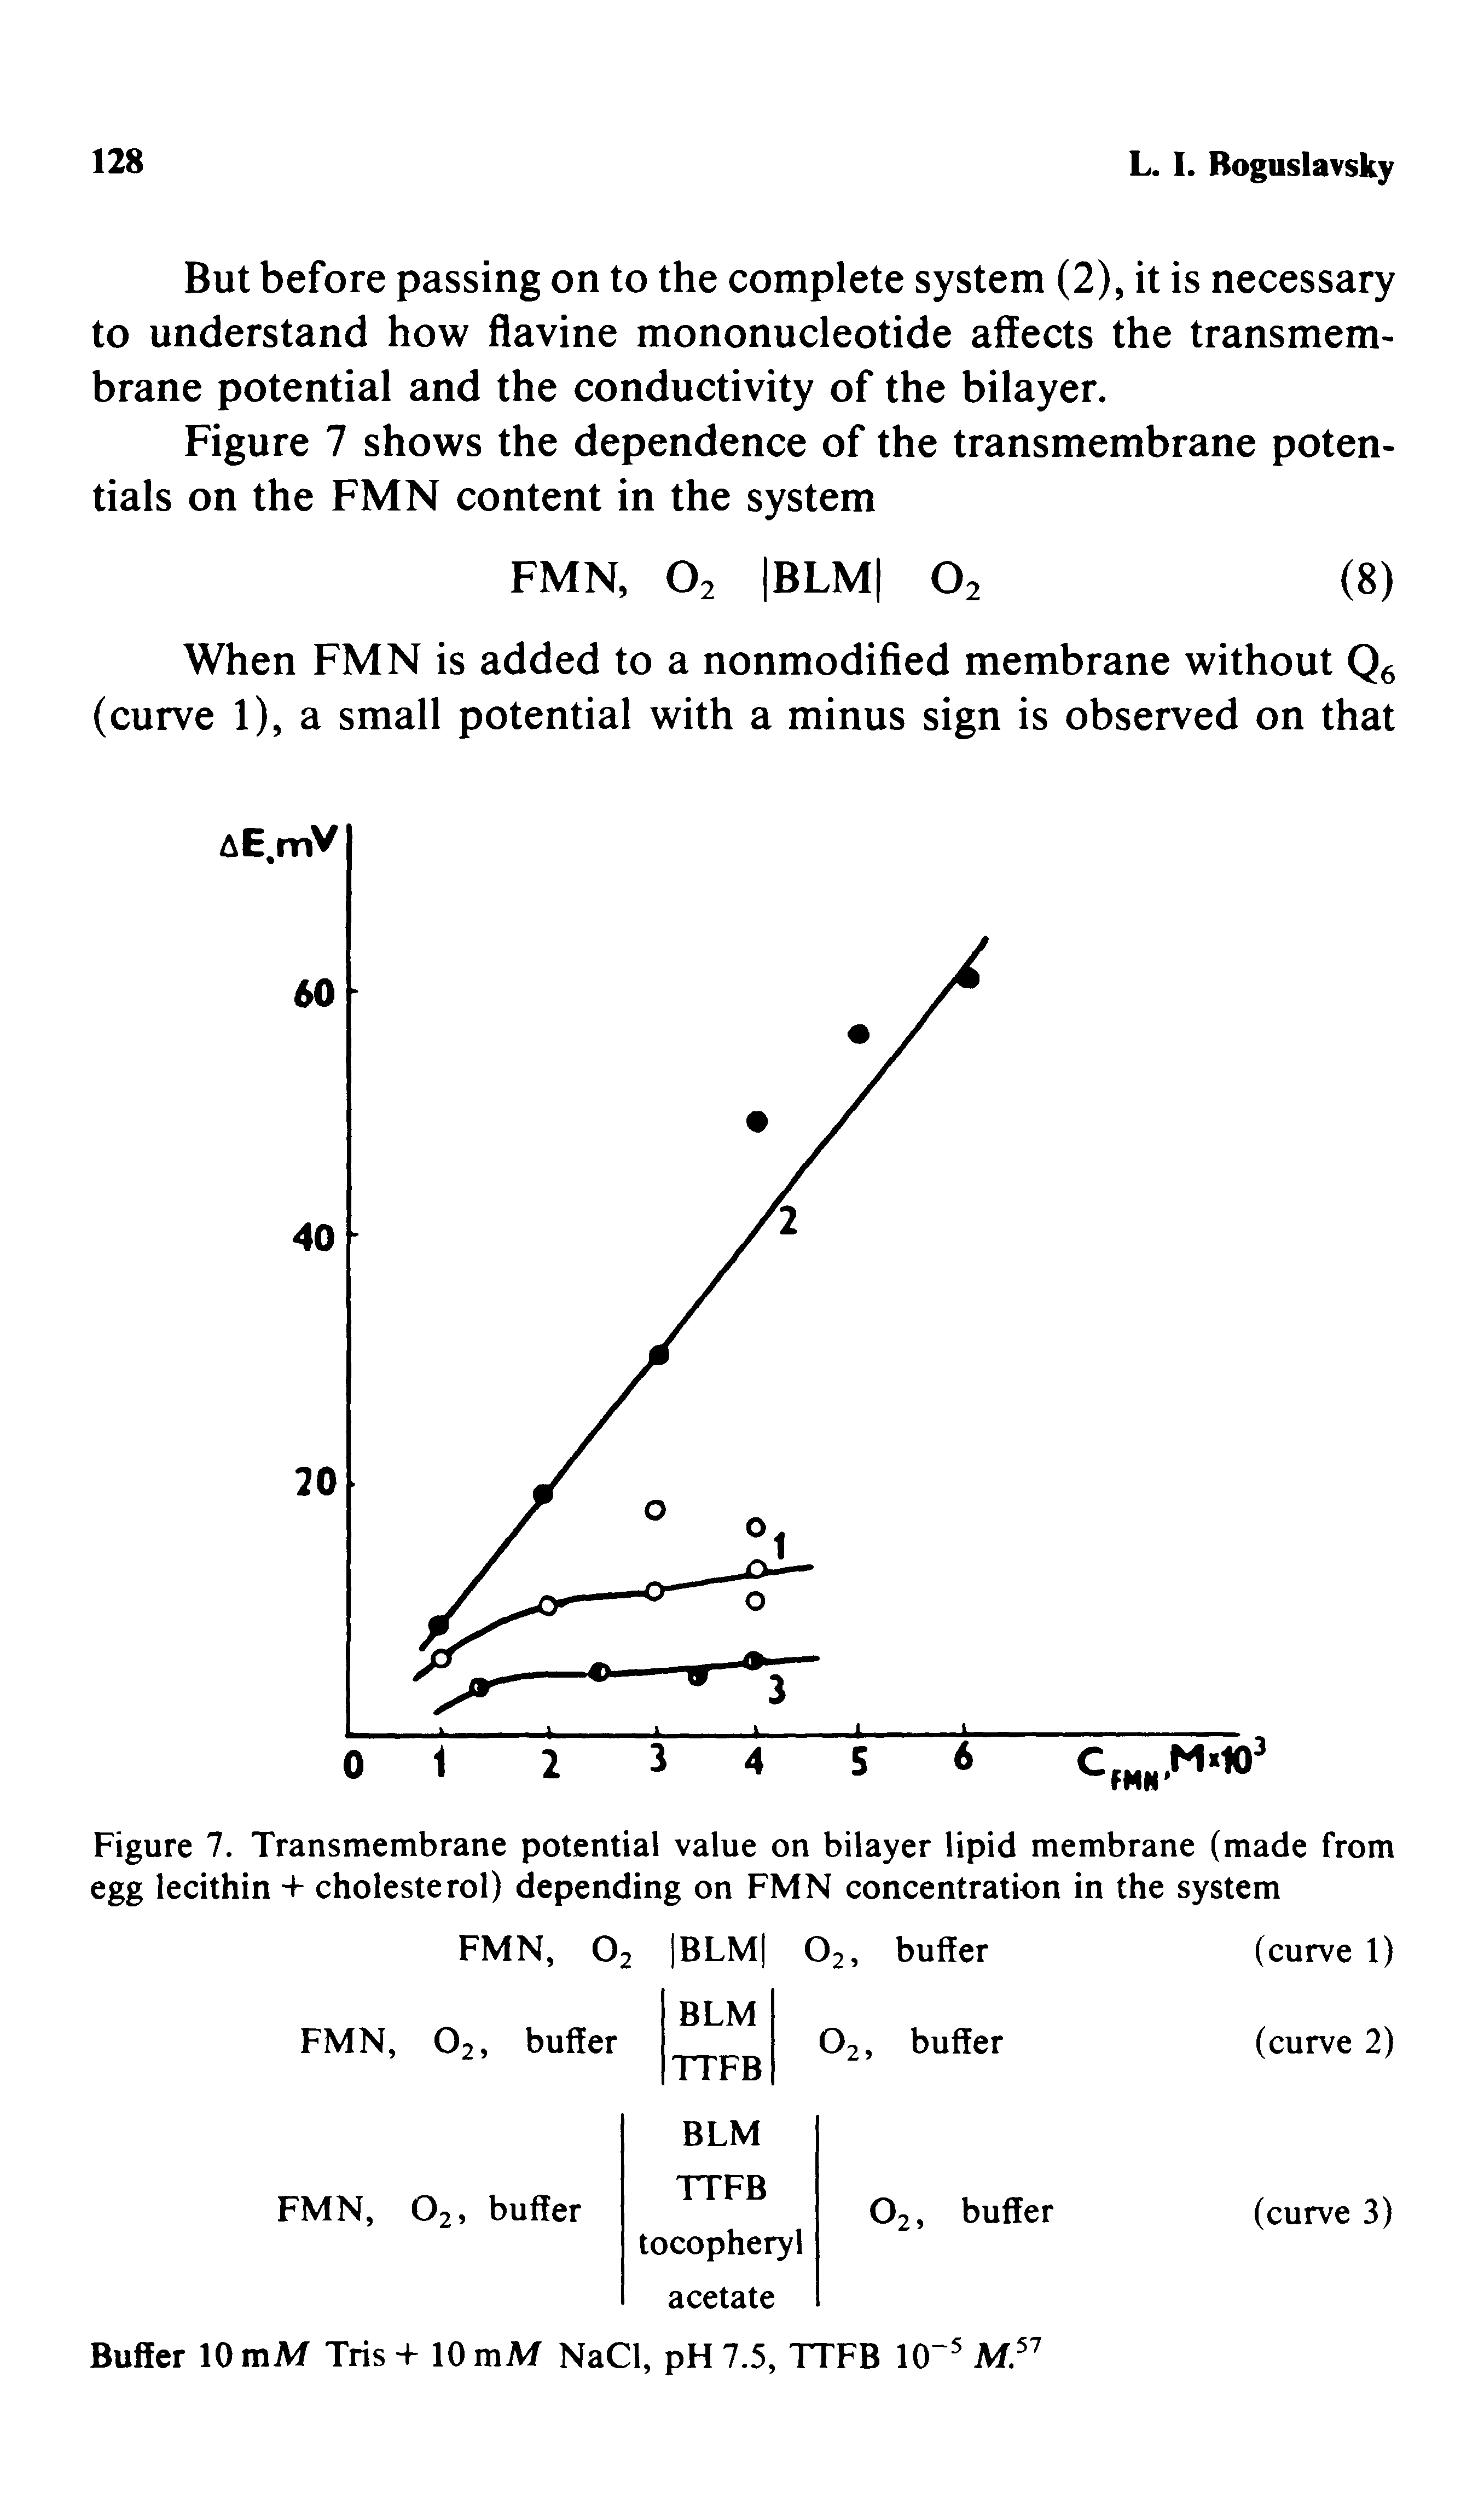 Figure 7. Transmembrane potential value on bilayer lipid membrane (made from egg lecithin + cholesterol) depending on FMN concentration in the system...